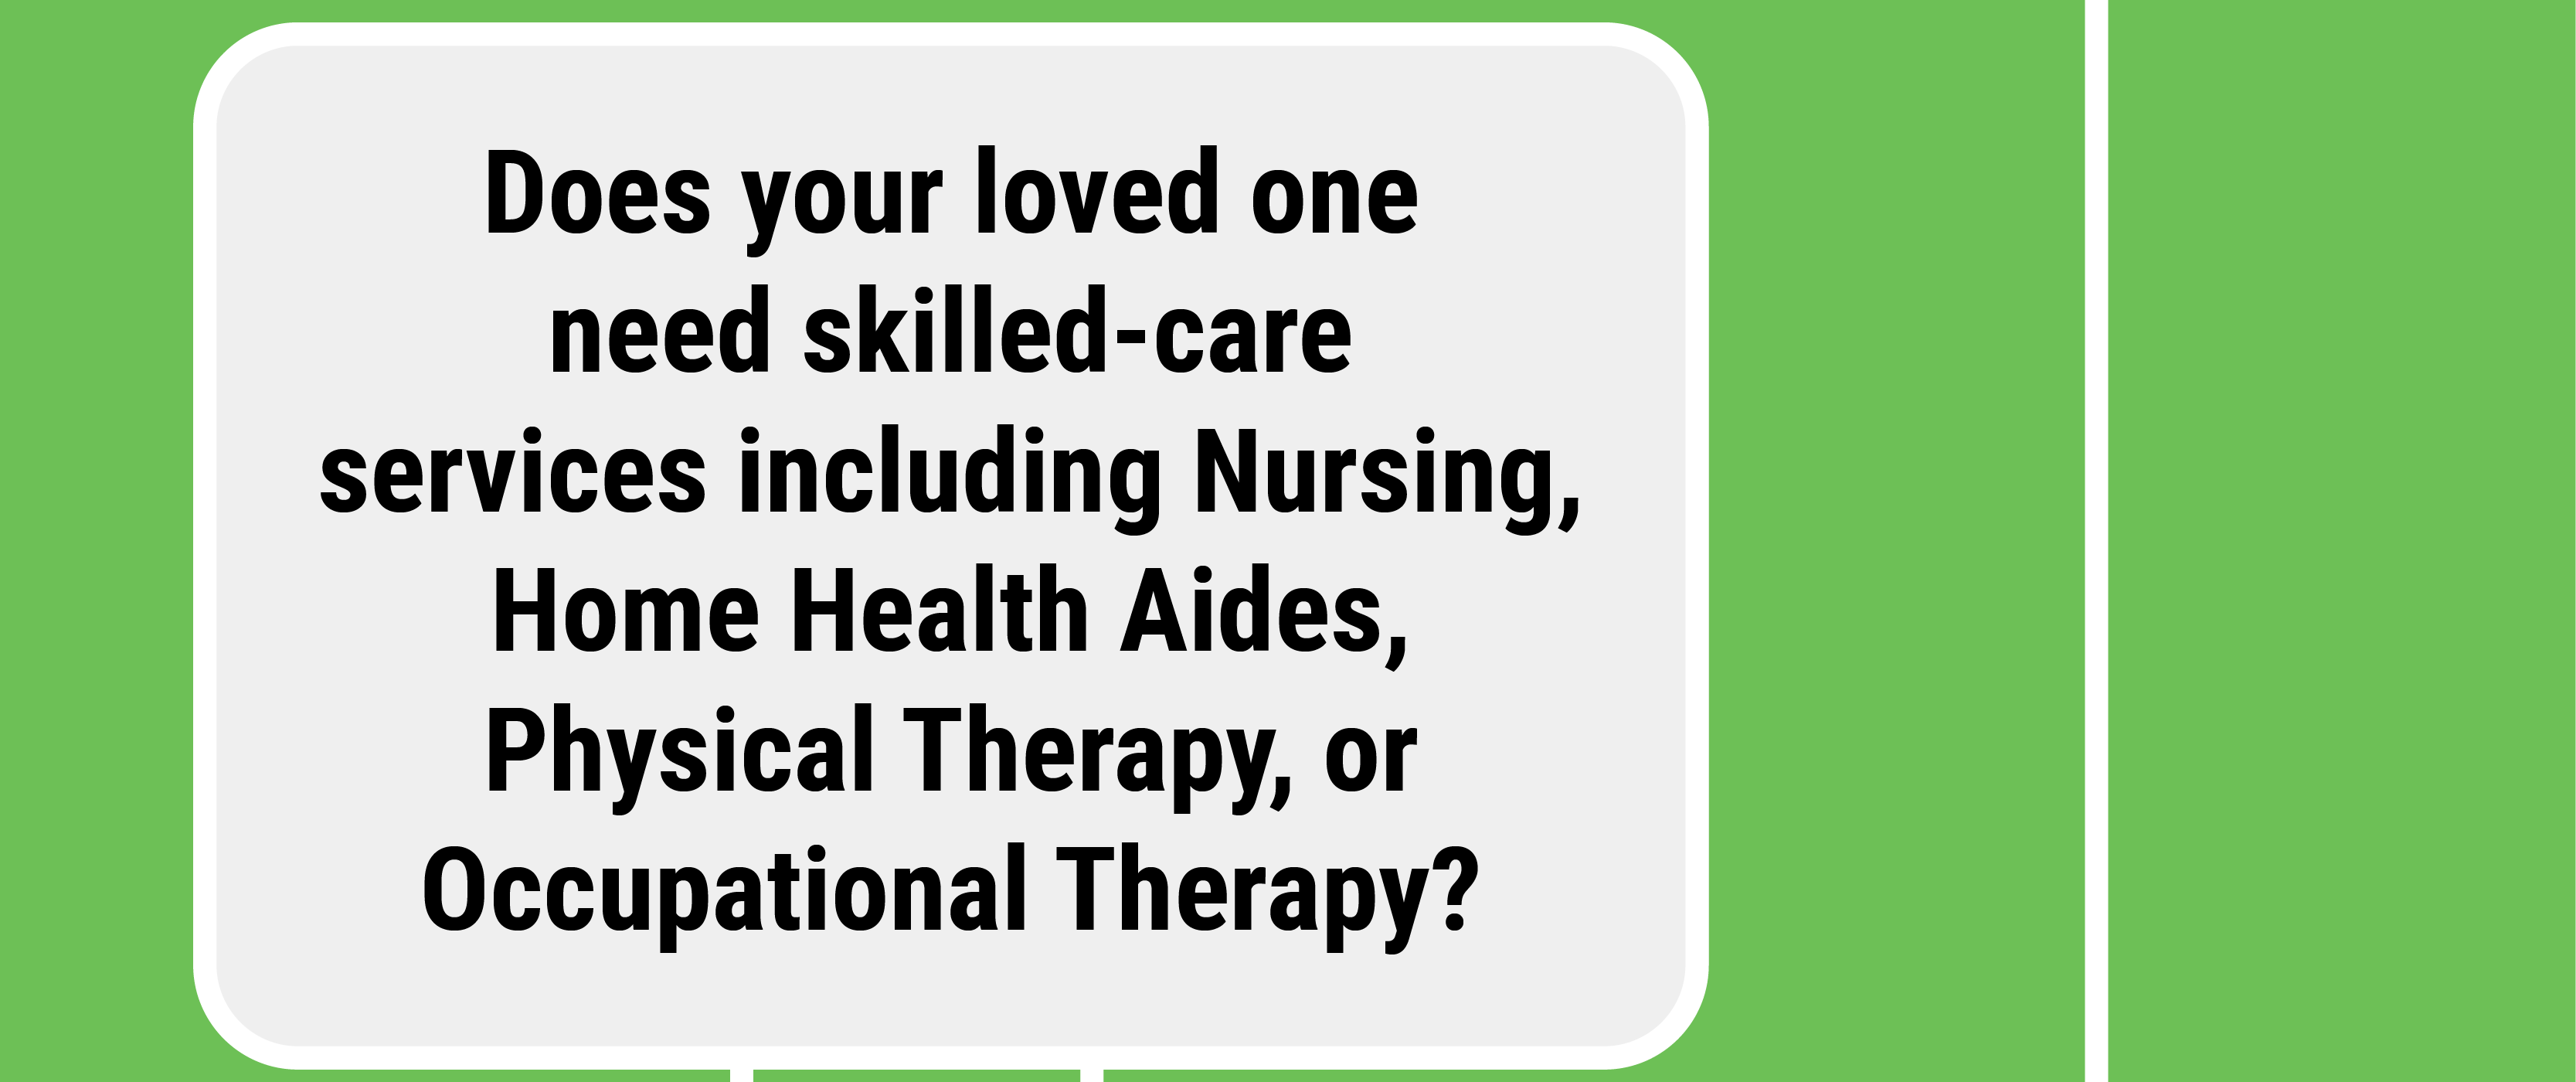 Does your loved one need skilled-care services including Nursing, Home Health Aides, Physical Therapy, or Occupational Therapy?